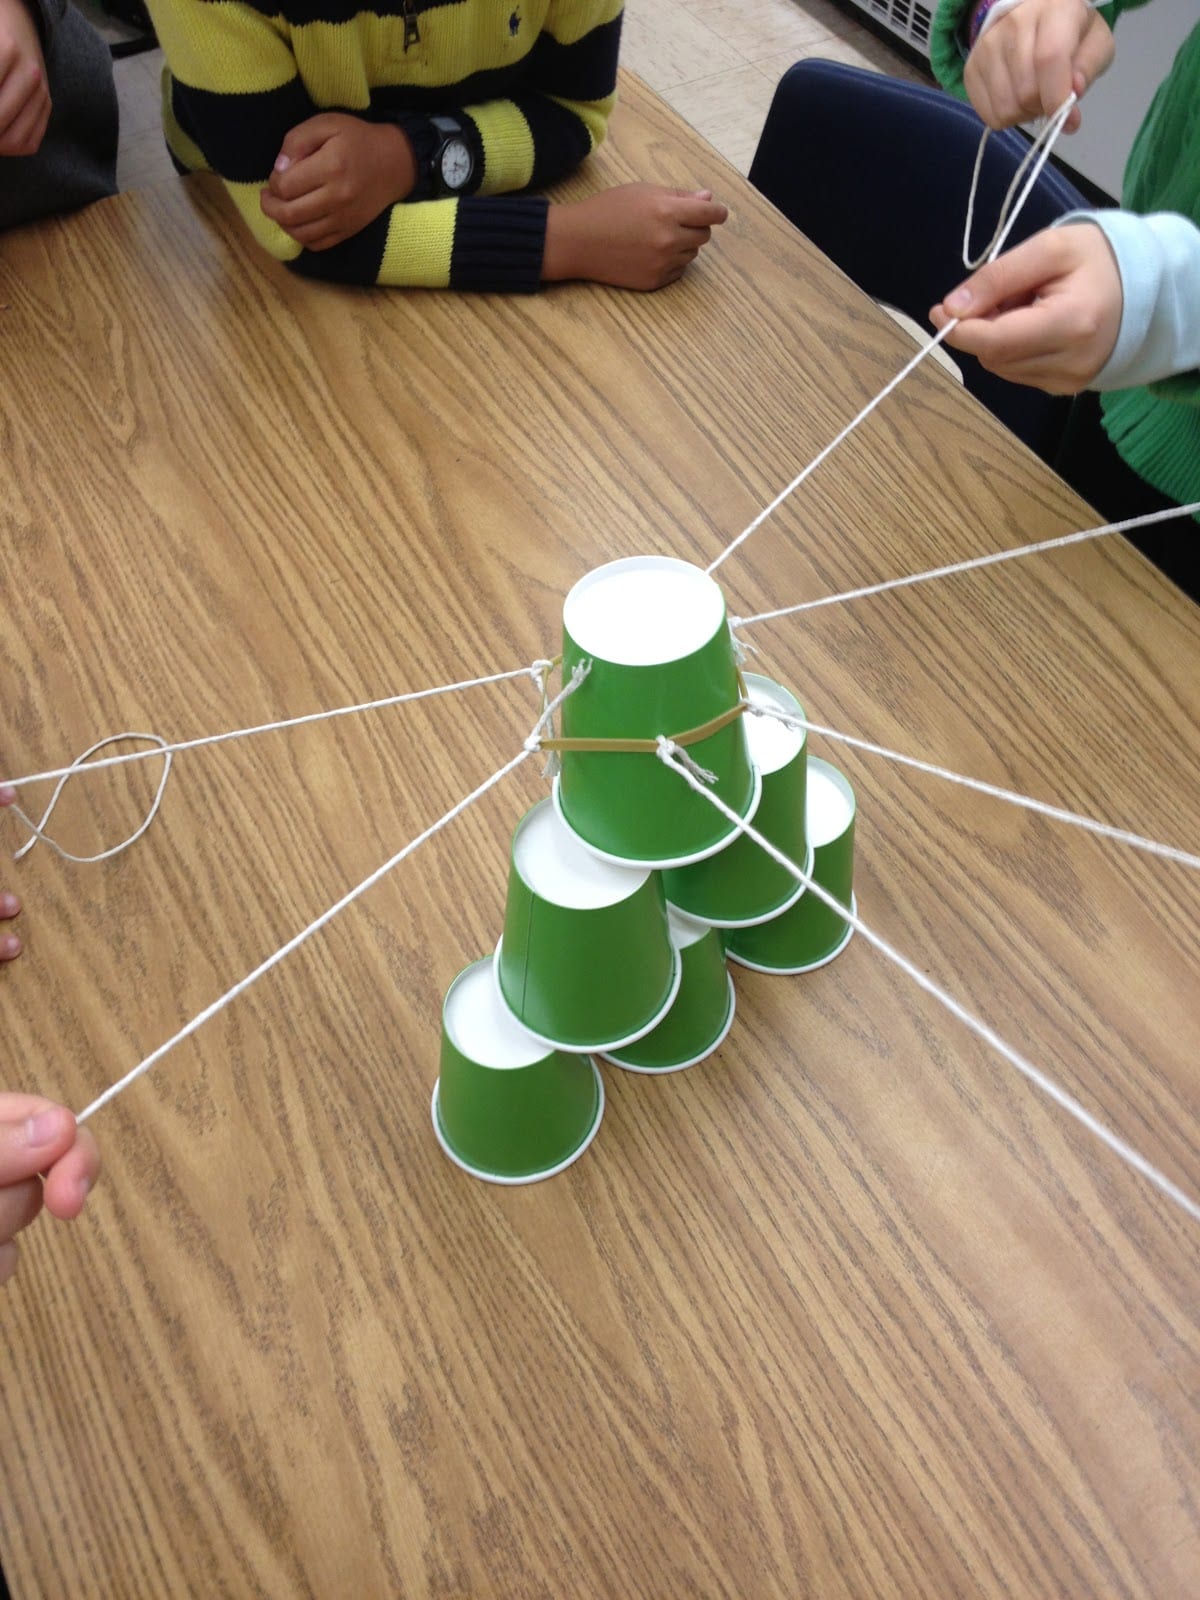 critical thinking team building activities